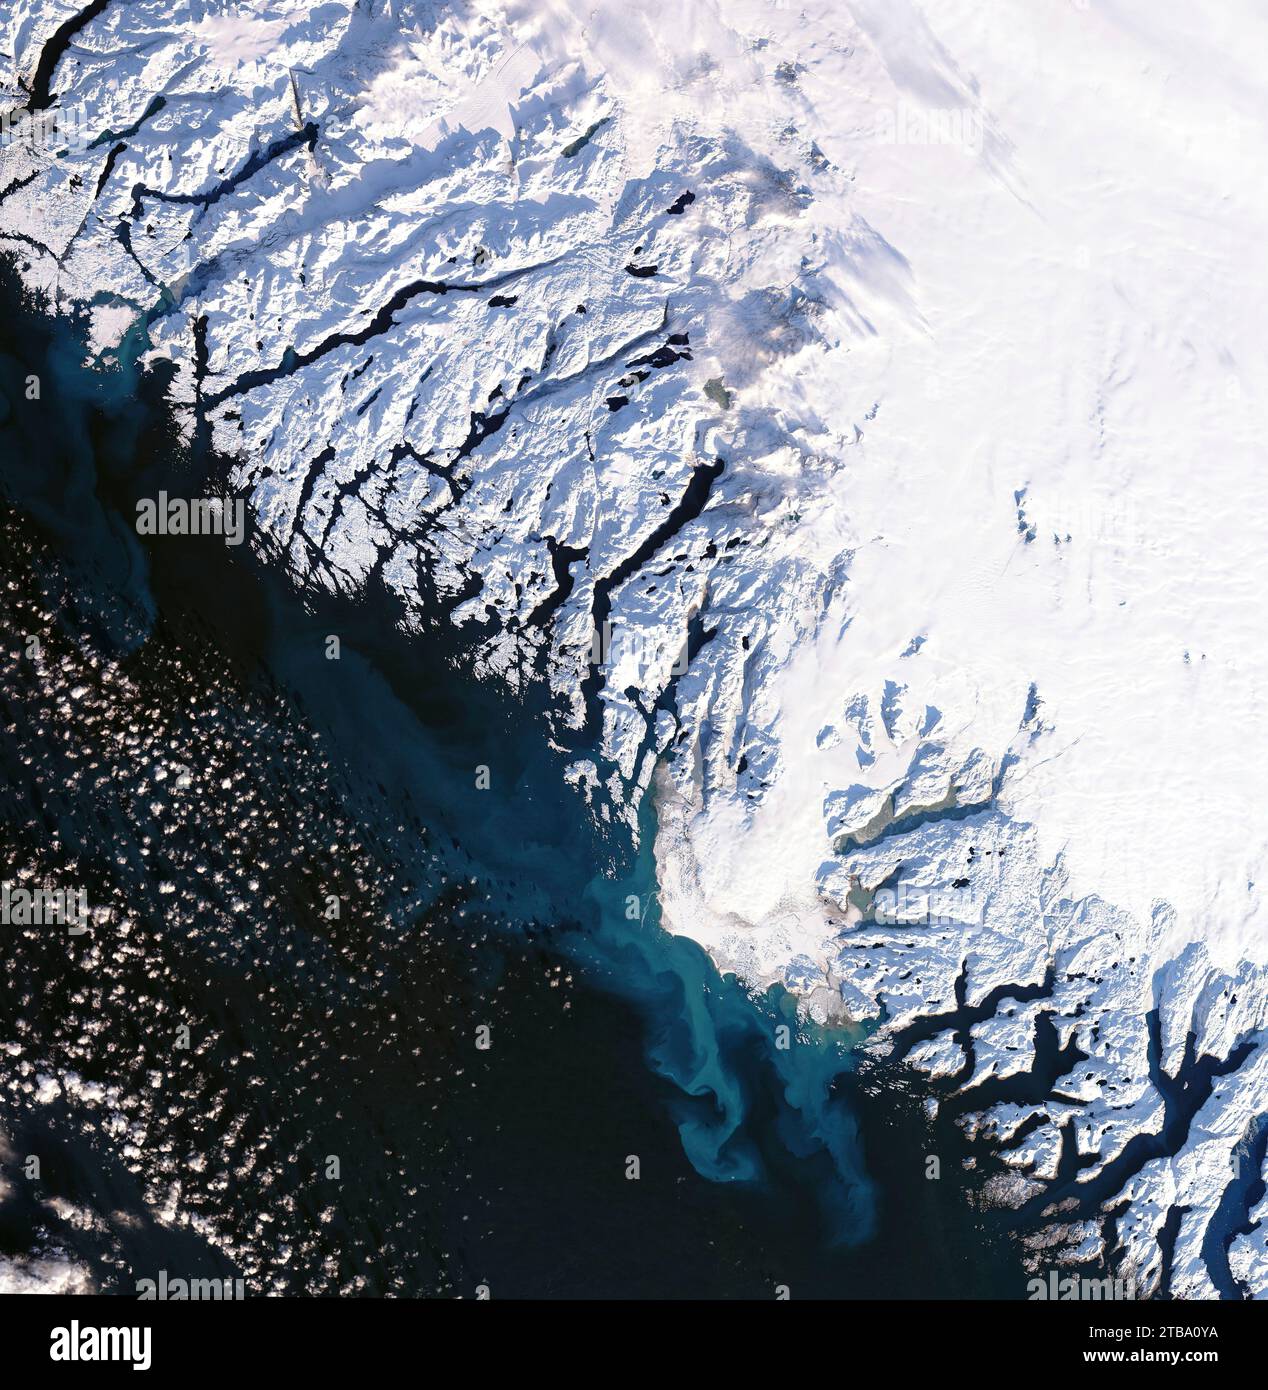 Glacial meltwater draining from Frederikshaab Isblink and mixing with the darker waters of the Labrador Sea. Stock Photo